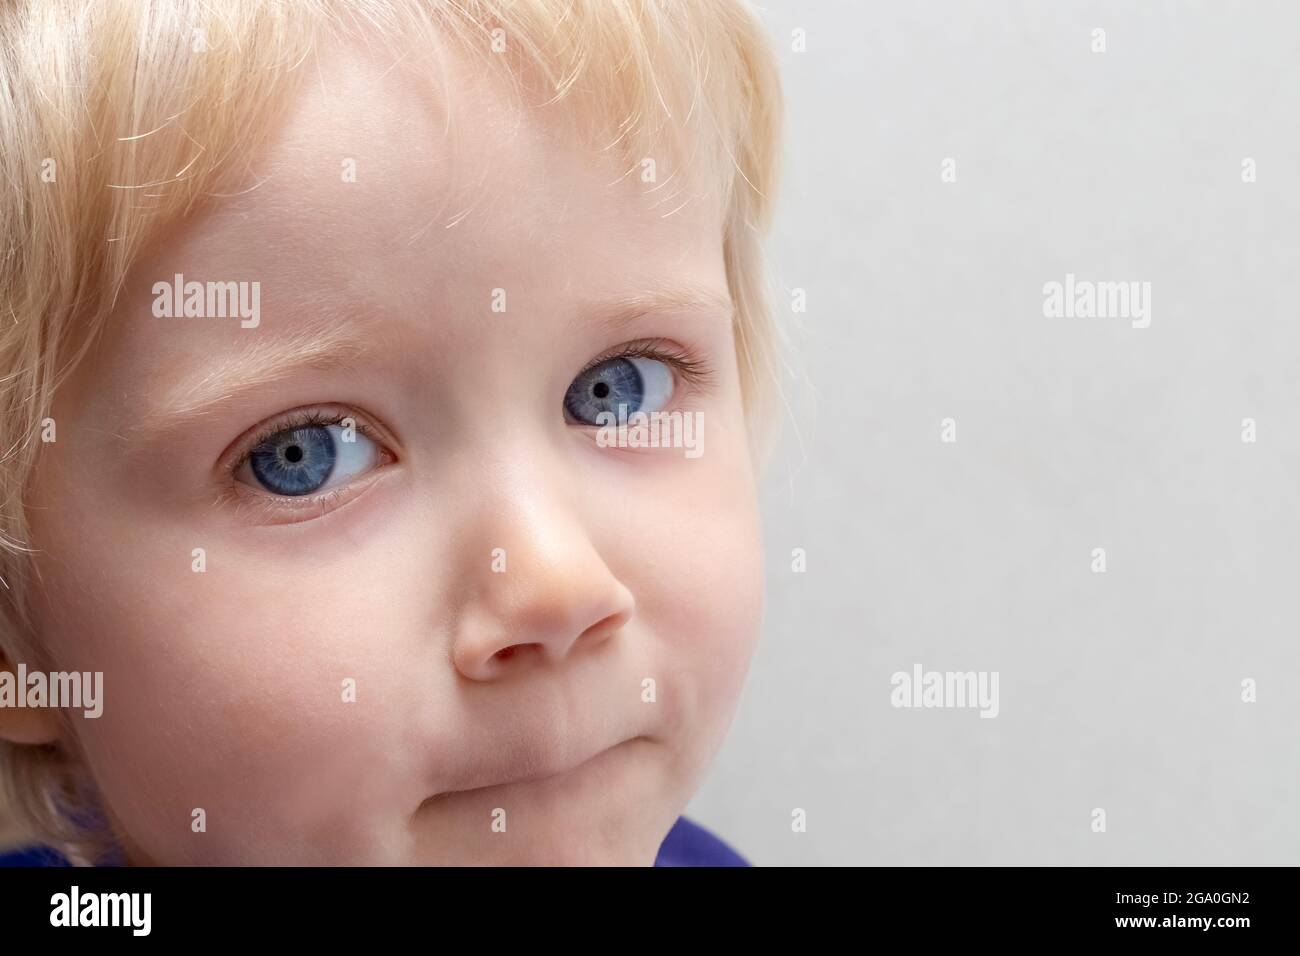 Portrait of a small child with blond hair, blue eyes, light skin on a gray background. Copy space to the right. Stock Photo